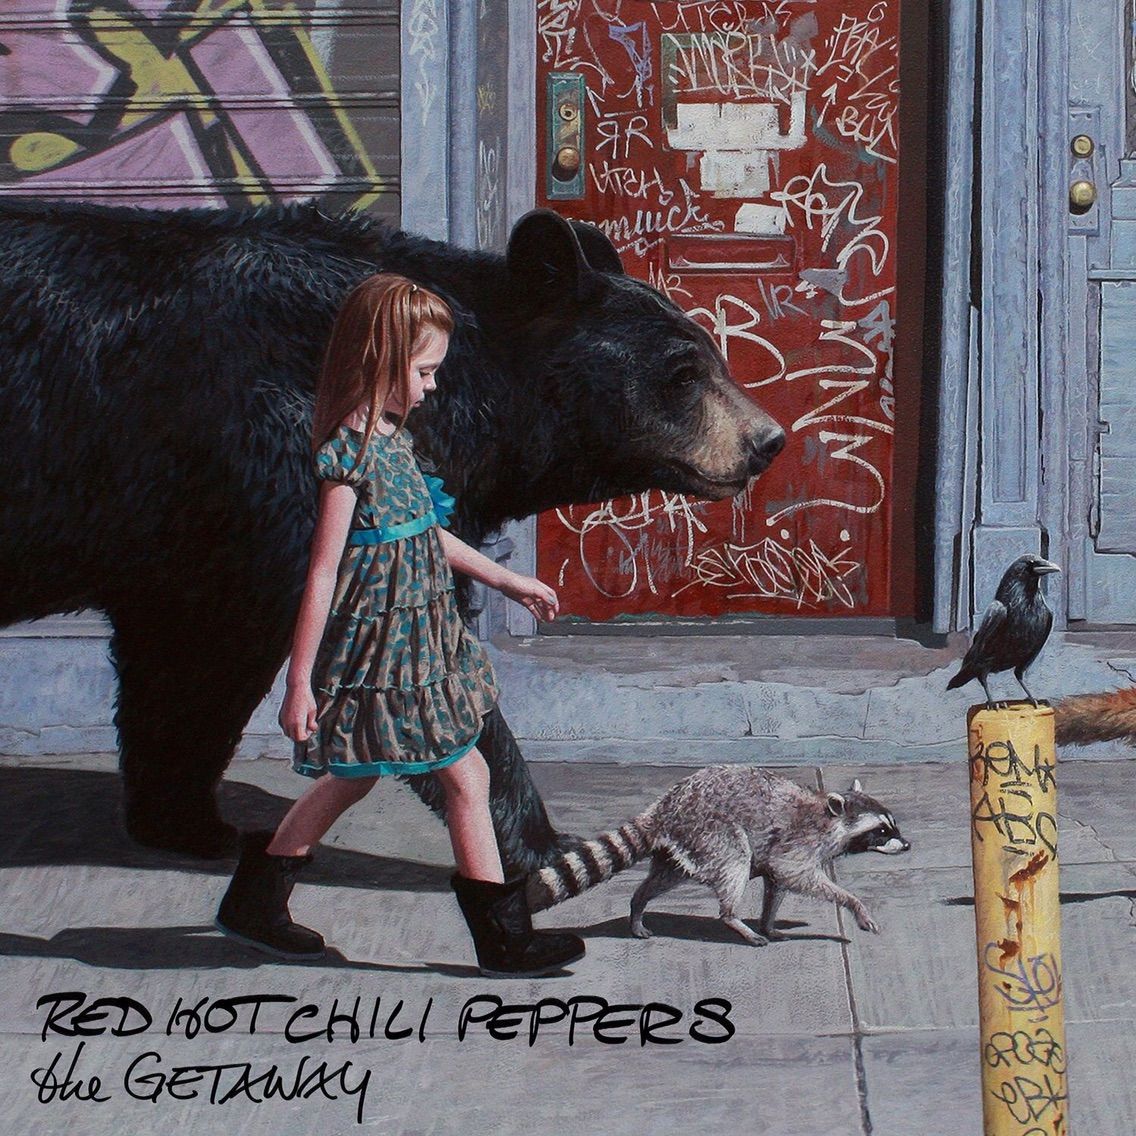 Red Hot Chili Peppers The Getaway 16 まぁ 頑張りまっか